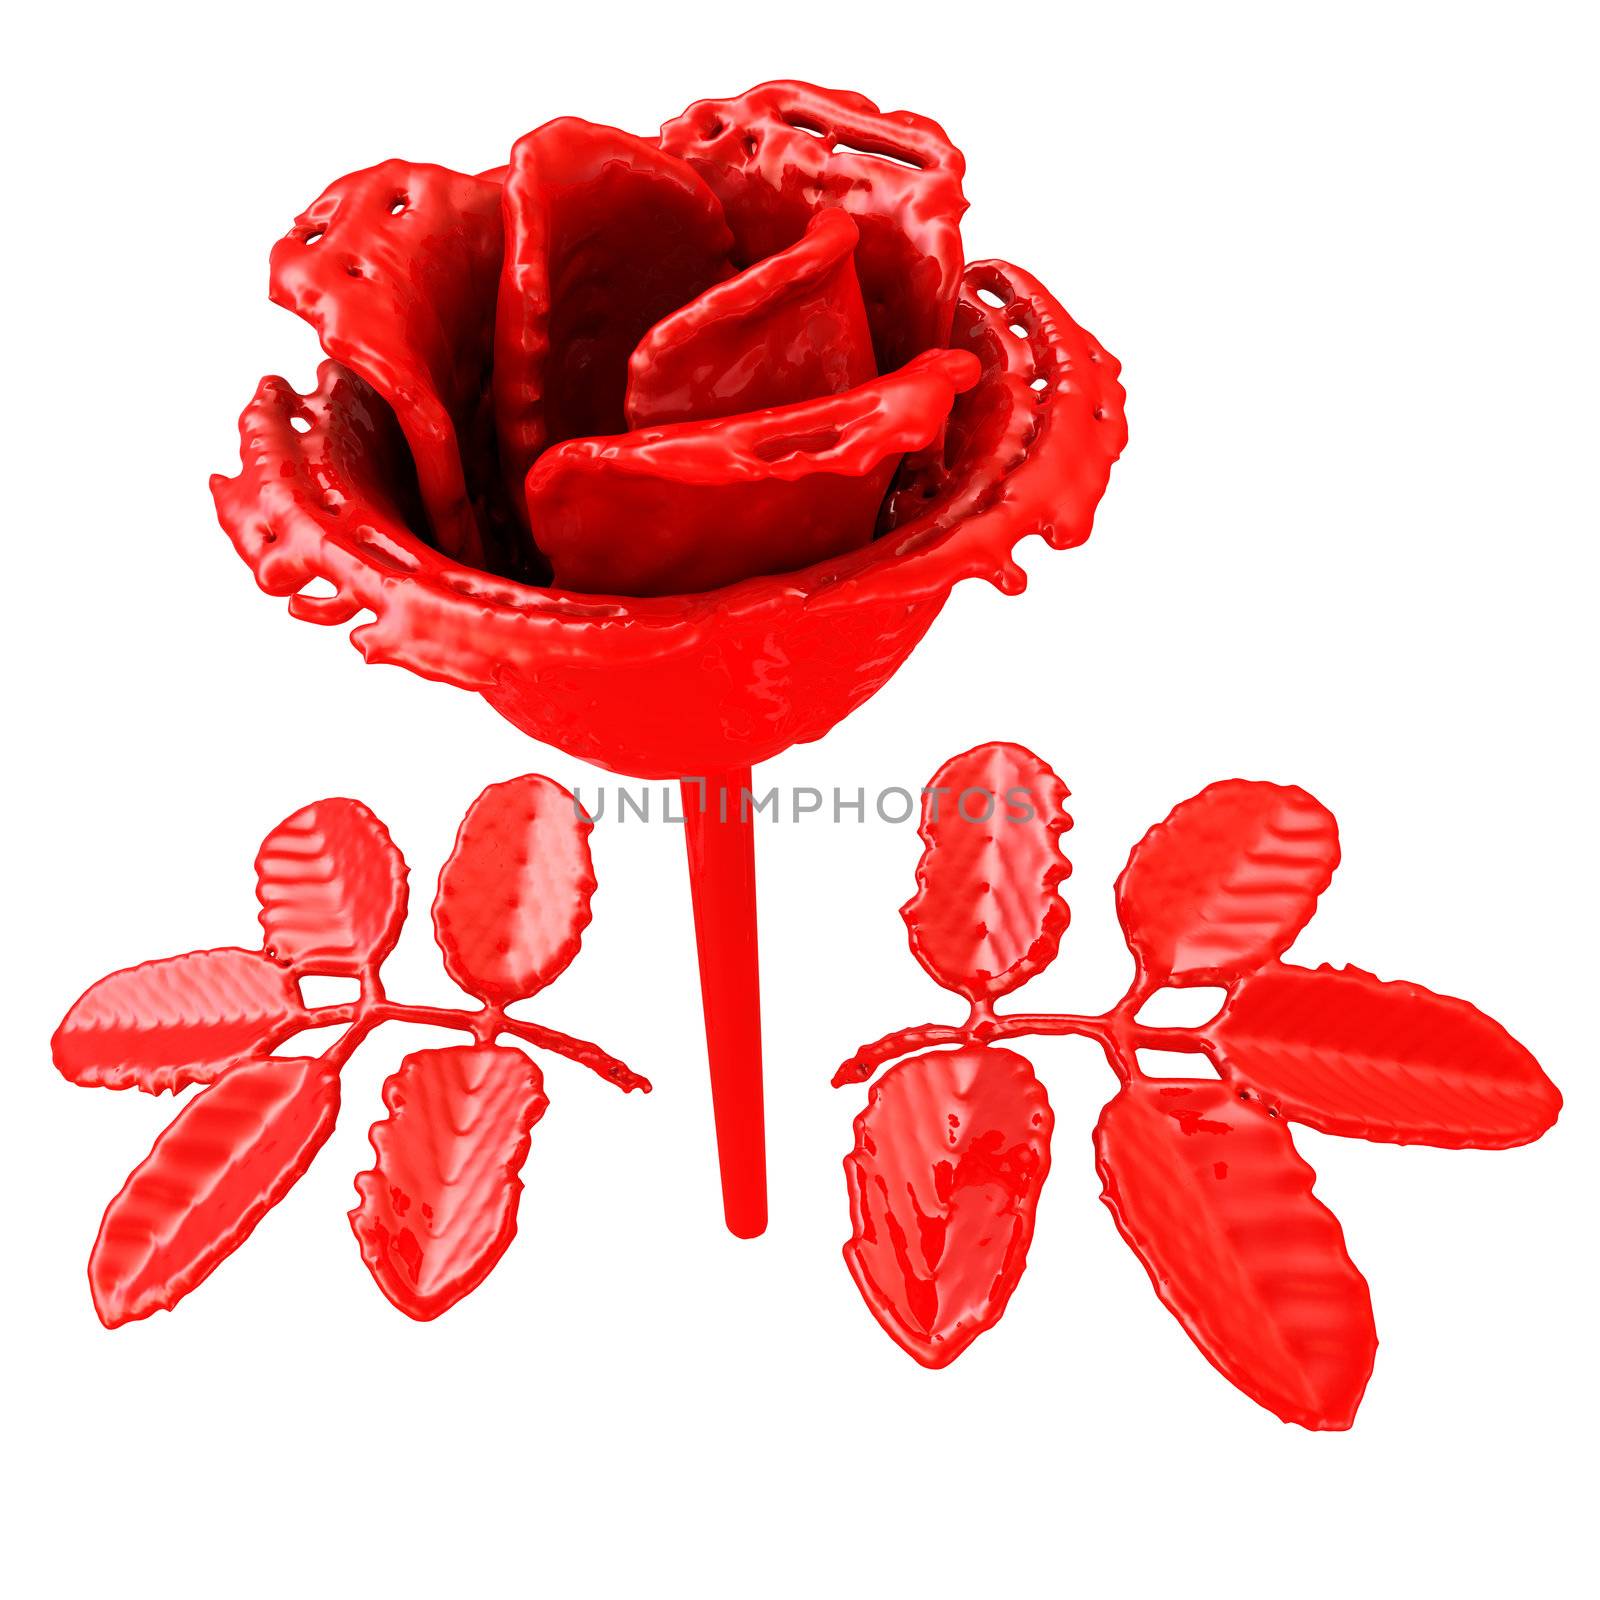 Red rose of the paint. Isolated on white background